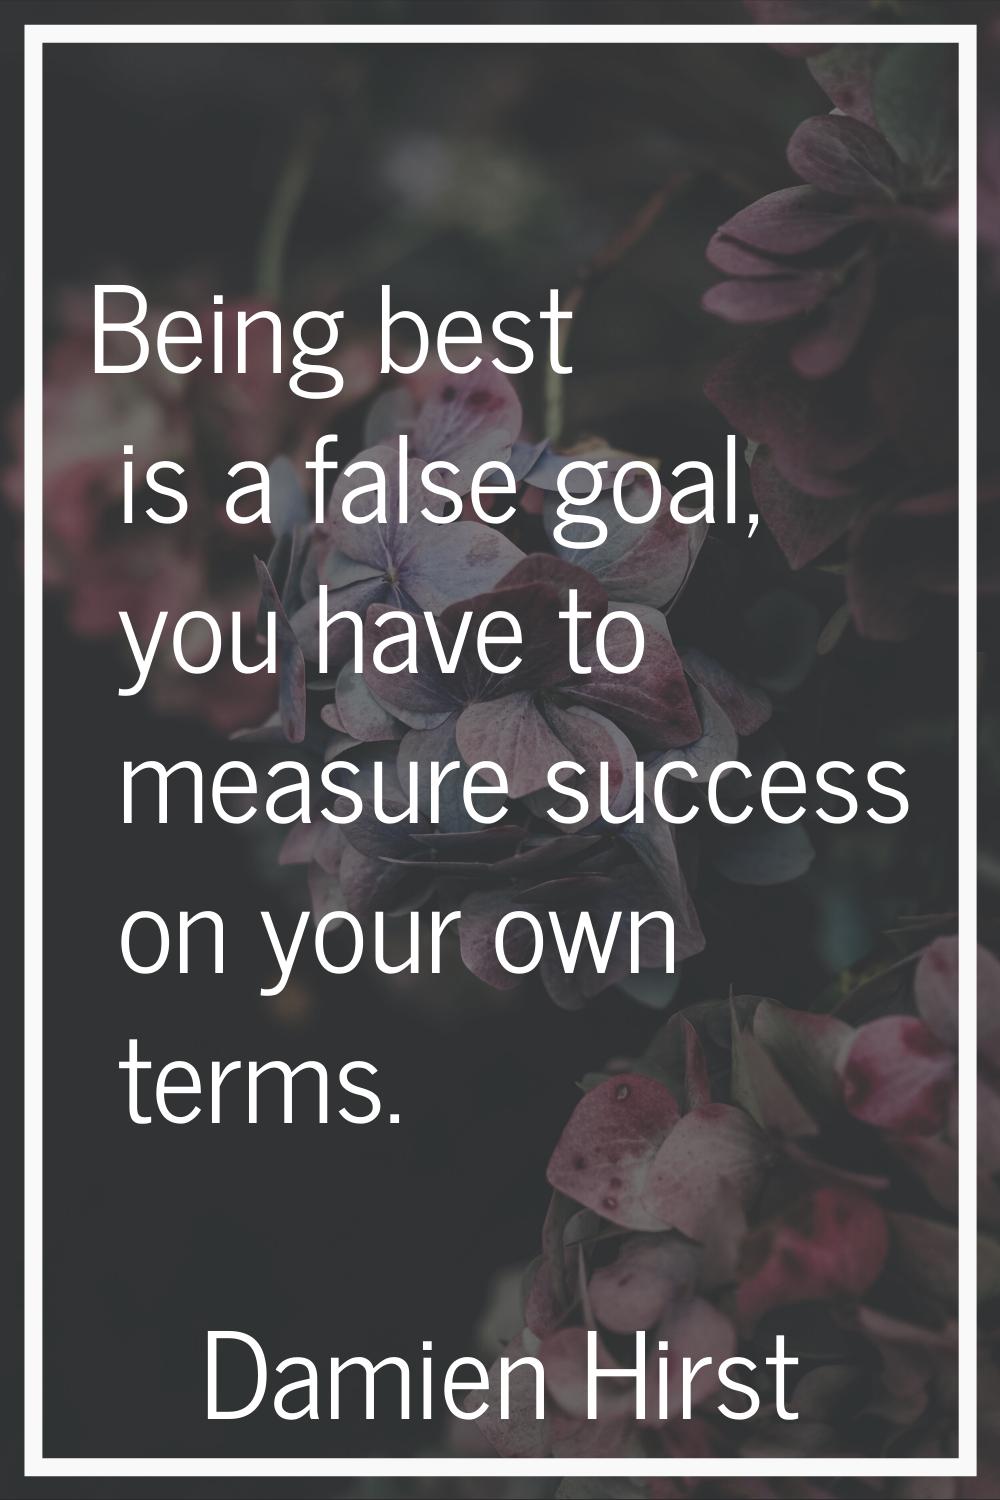 Being best is a false goal, you have to measure success on your own terms.